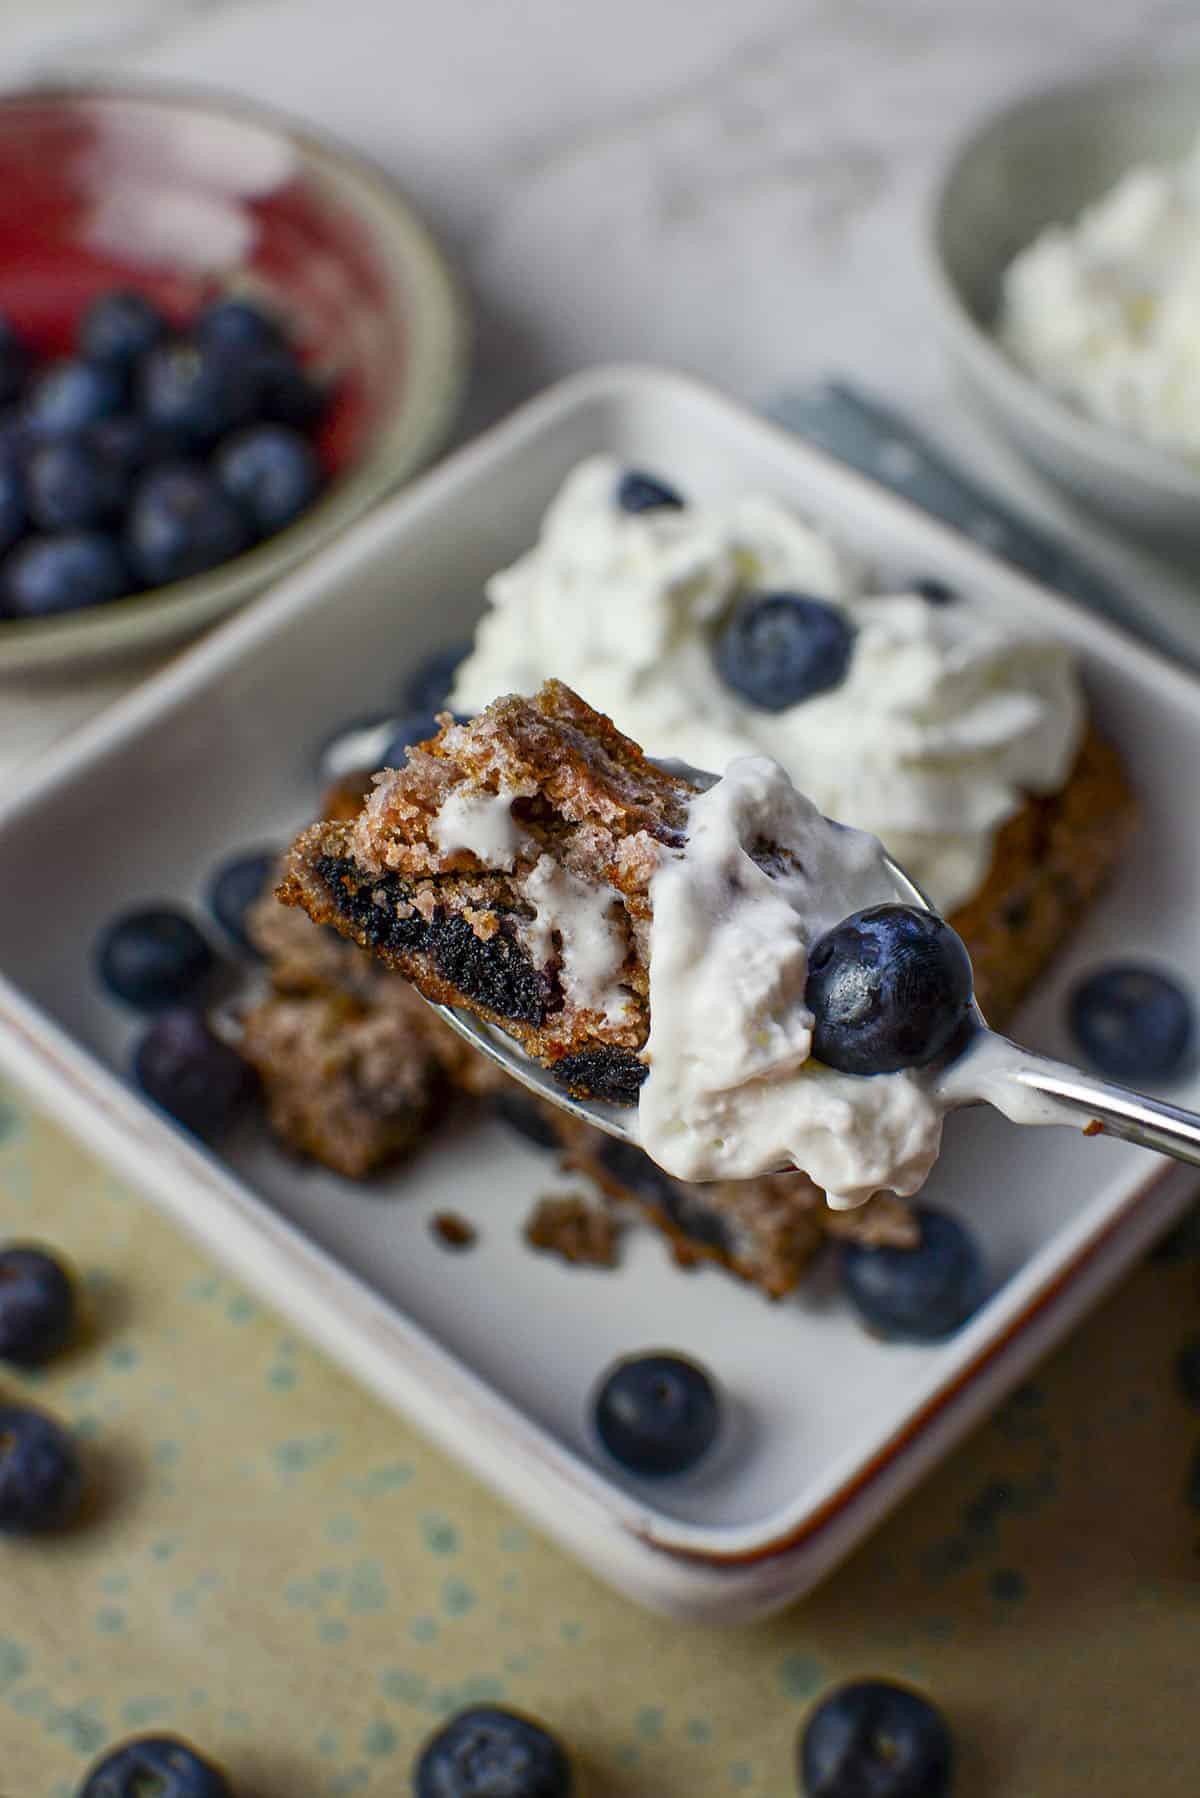 A spoonful bite of the blueberry cake with whipped cream and fresh blueberries.